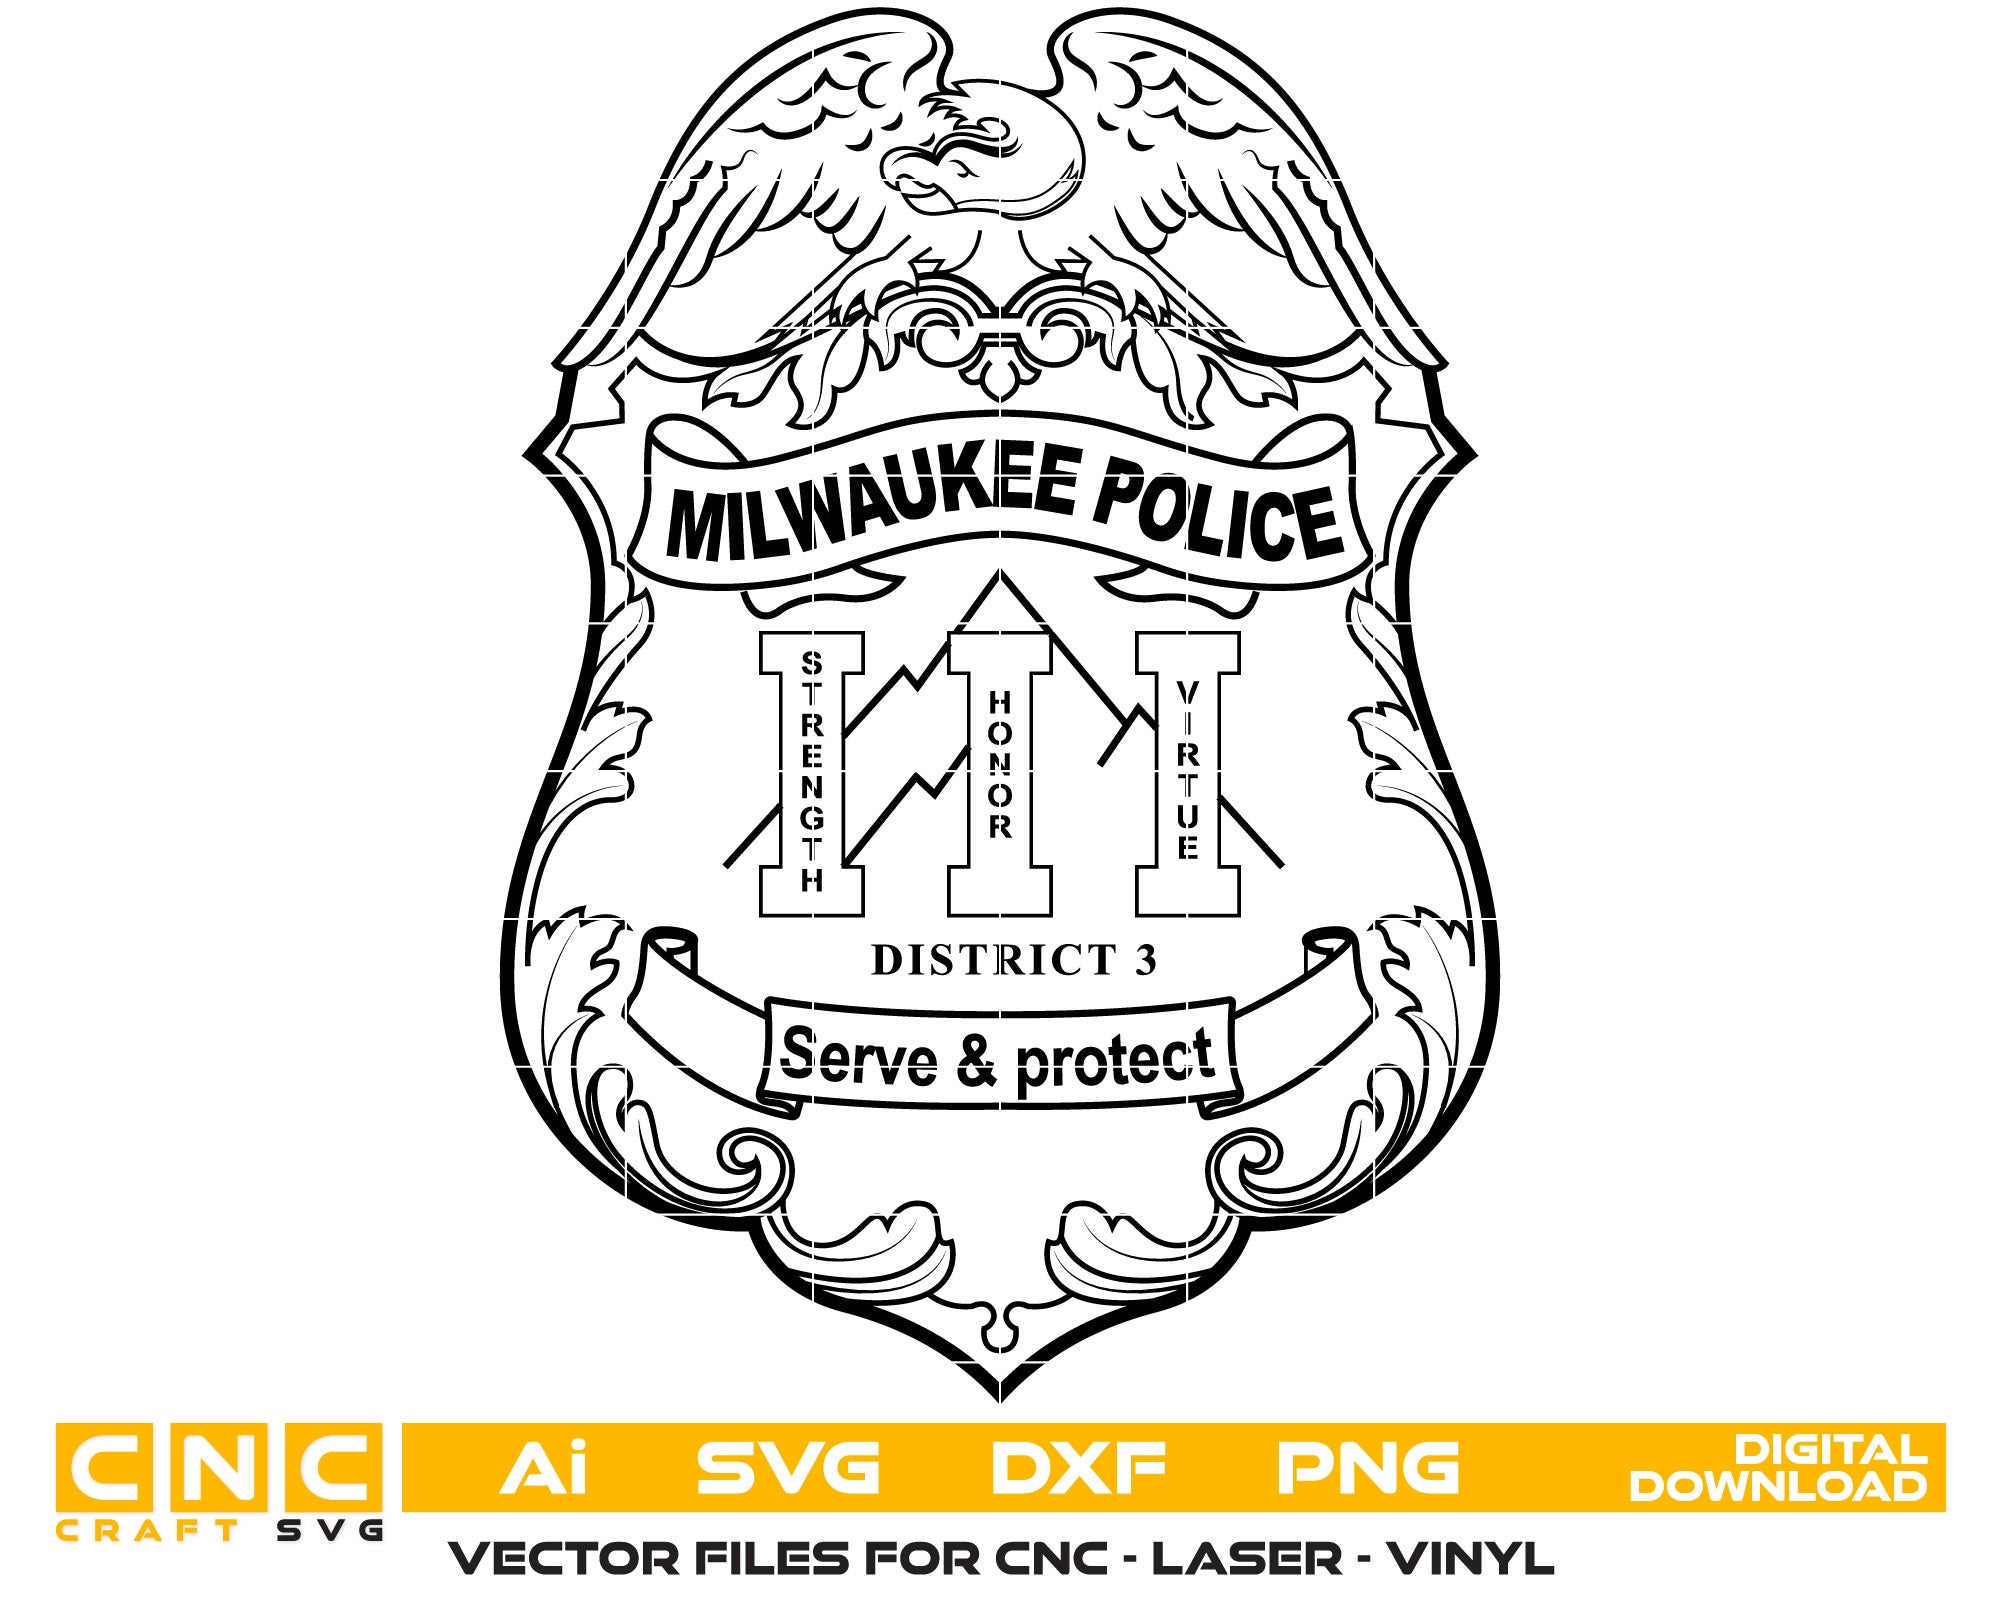 Milwaukee Police Serve and Protect Badge Vector Art, Ai,SVG, DXF, PNG, Digital Files